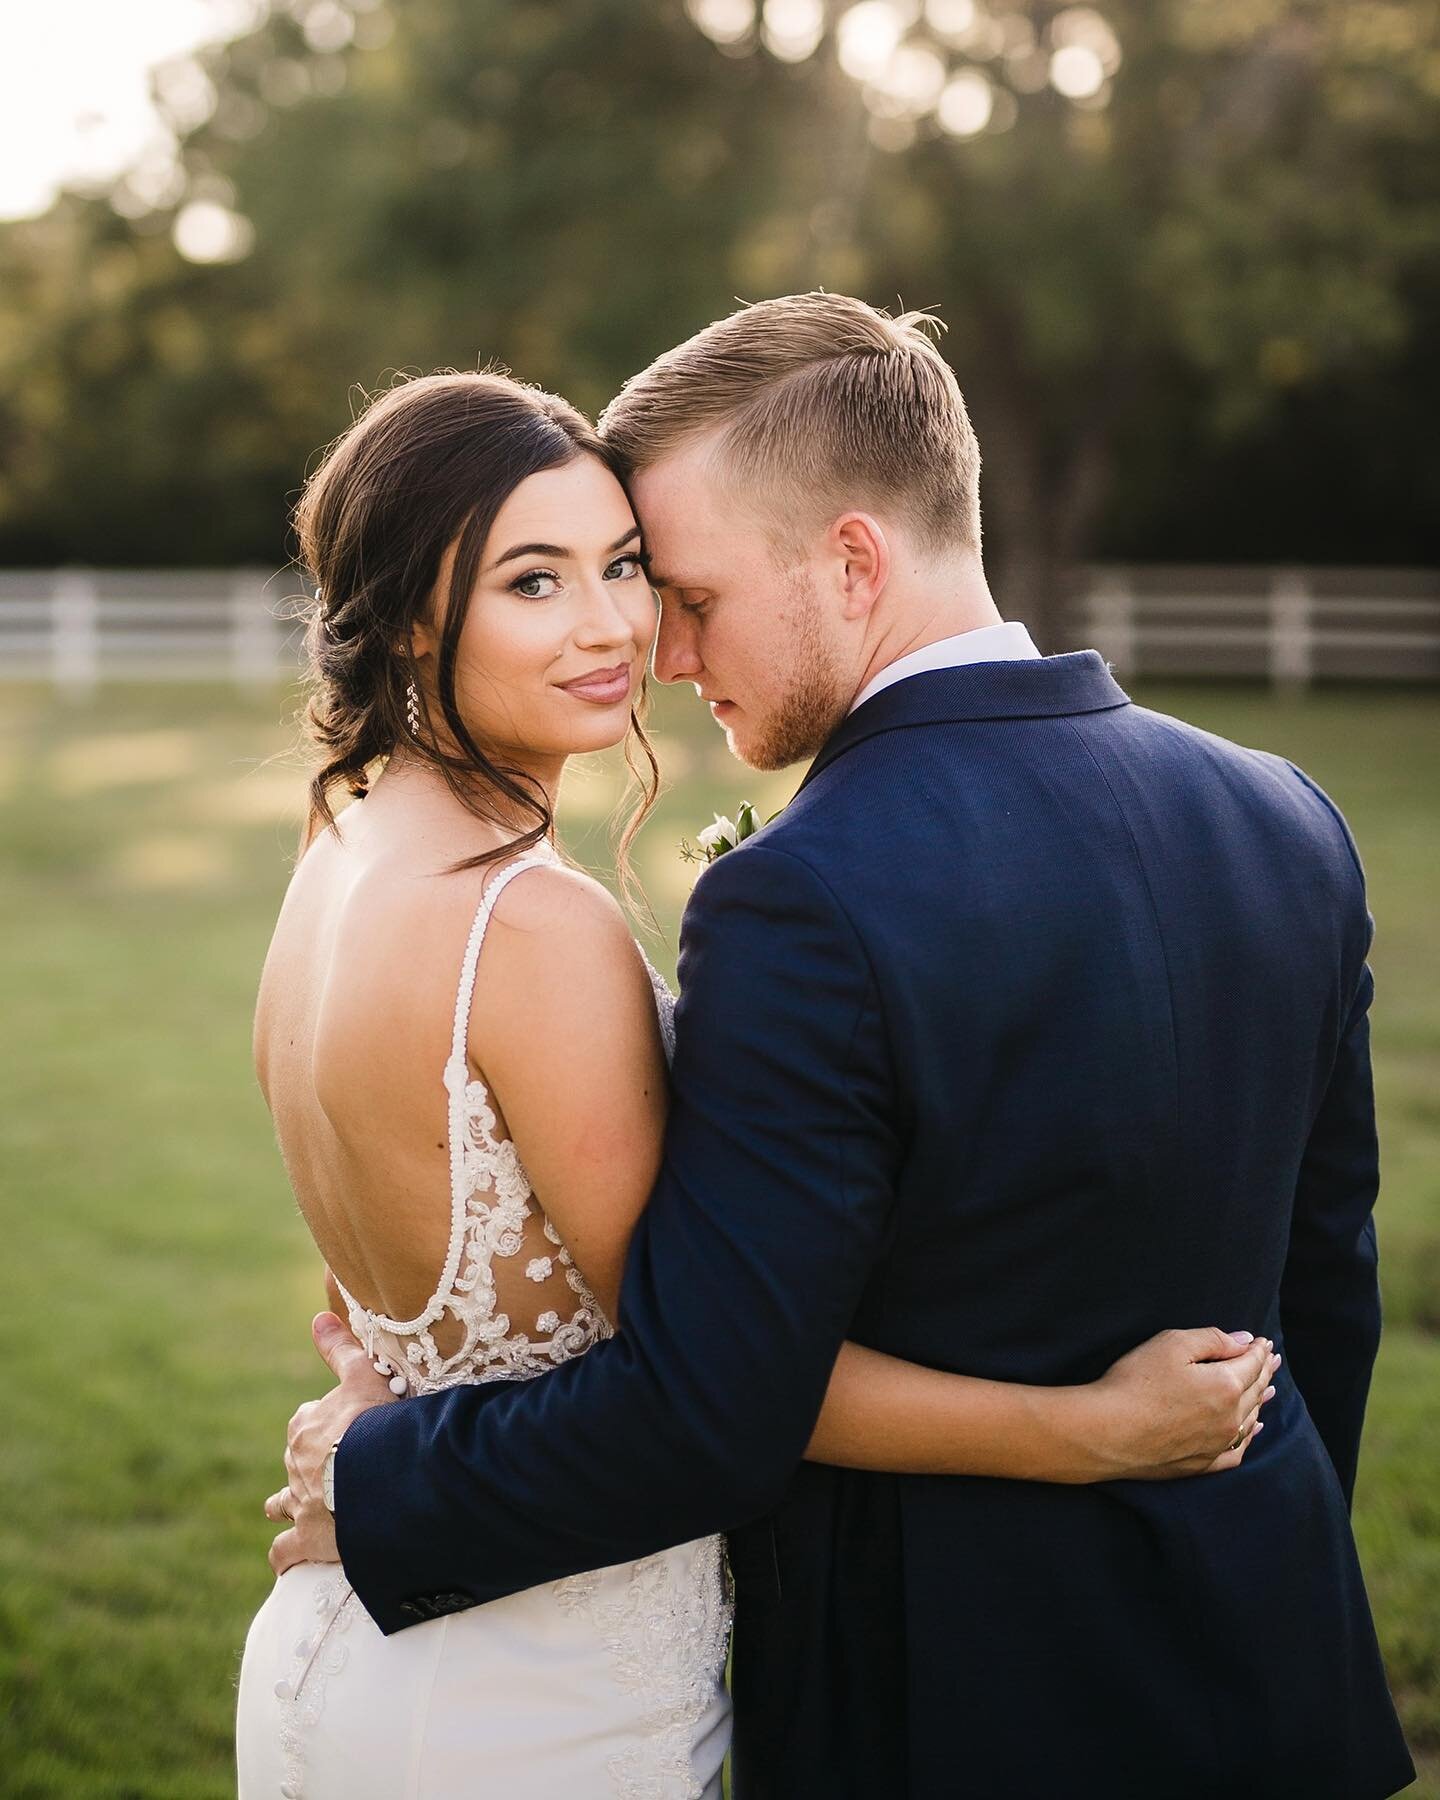 Taylor + Dillon. Aren't they just stunning?! And the love they have for each other is even sweeter. Congratulations, you two!